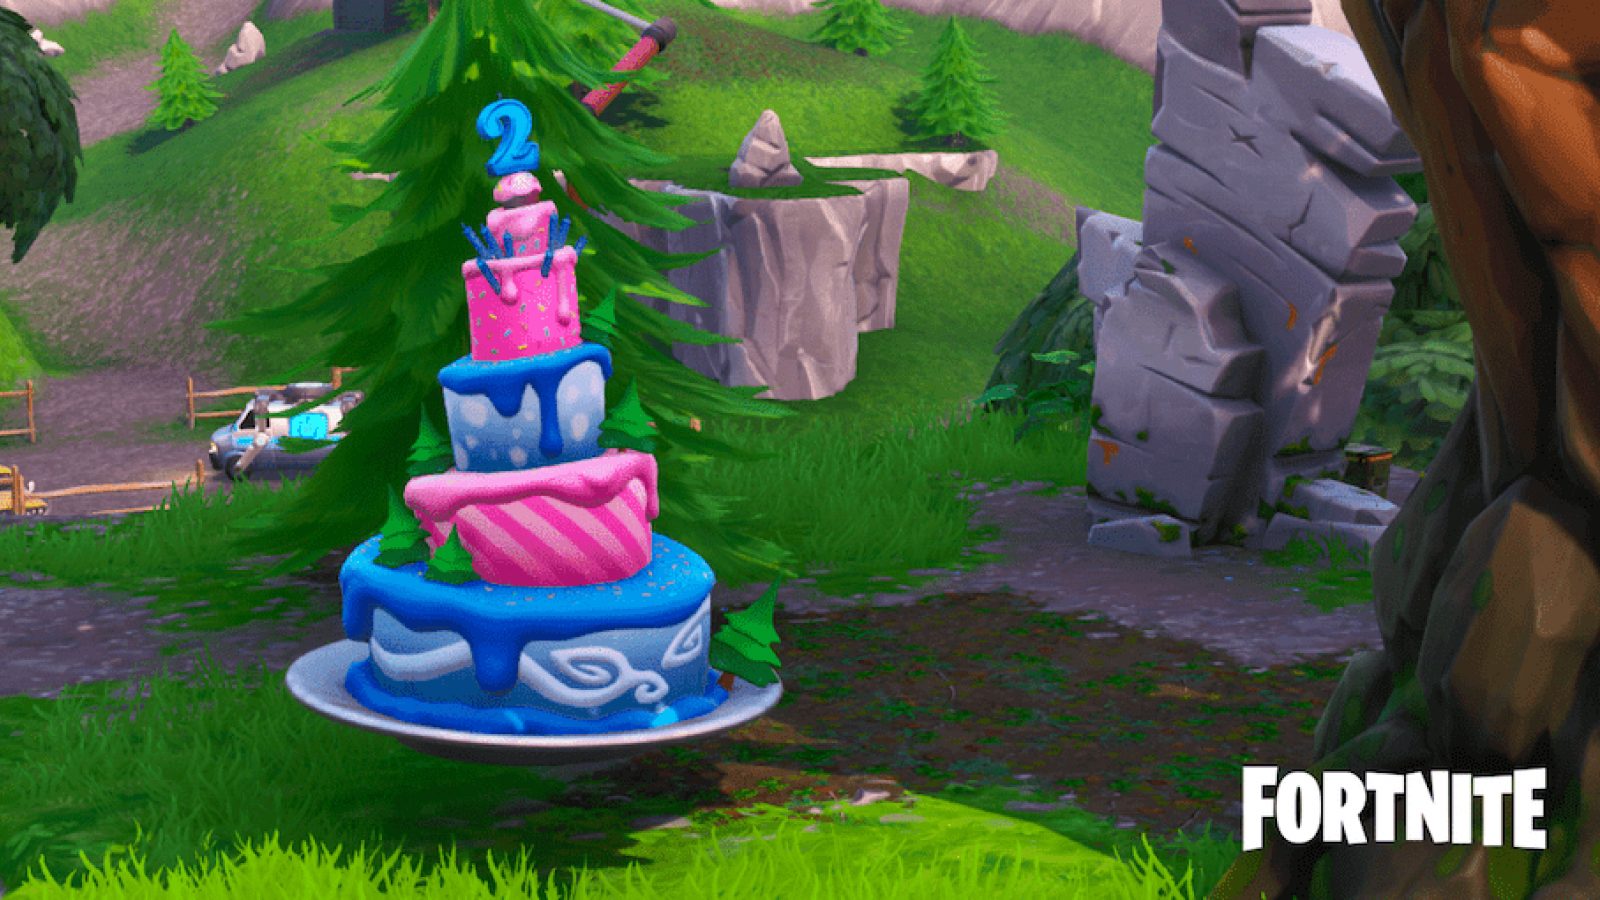 Fortnite 4th Birthday Challenges: How To Complete & Unlock Free Rewards